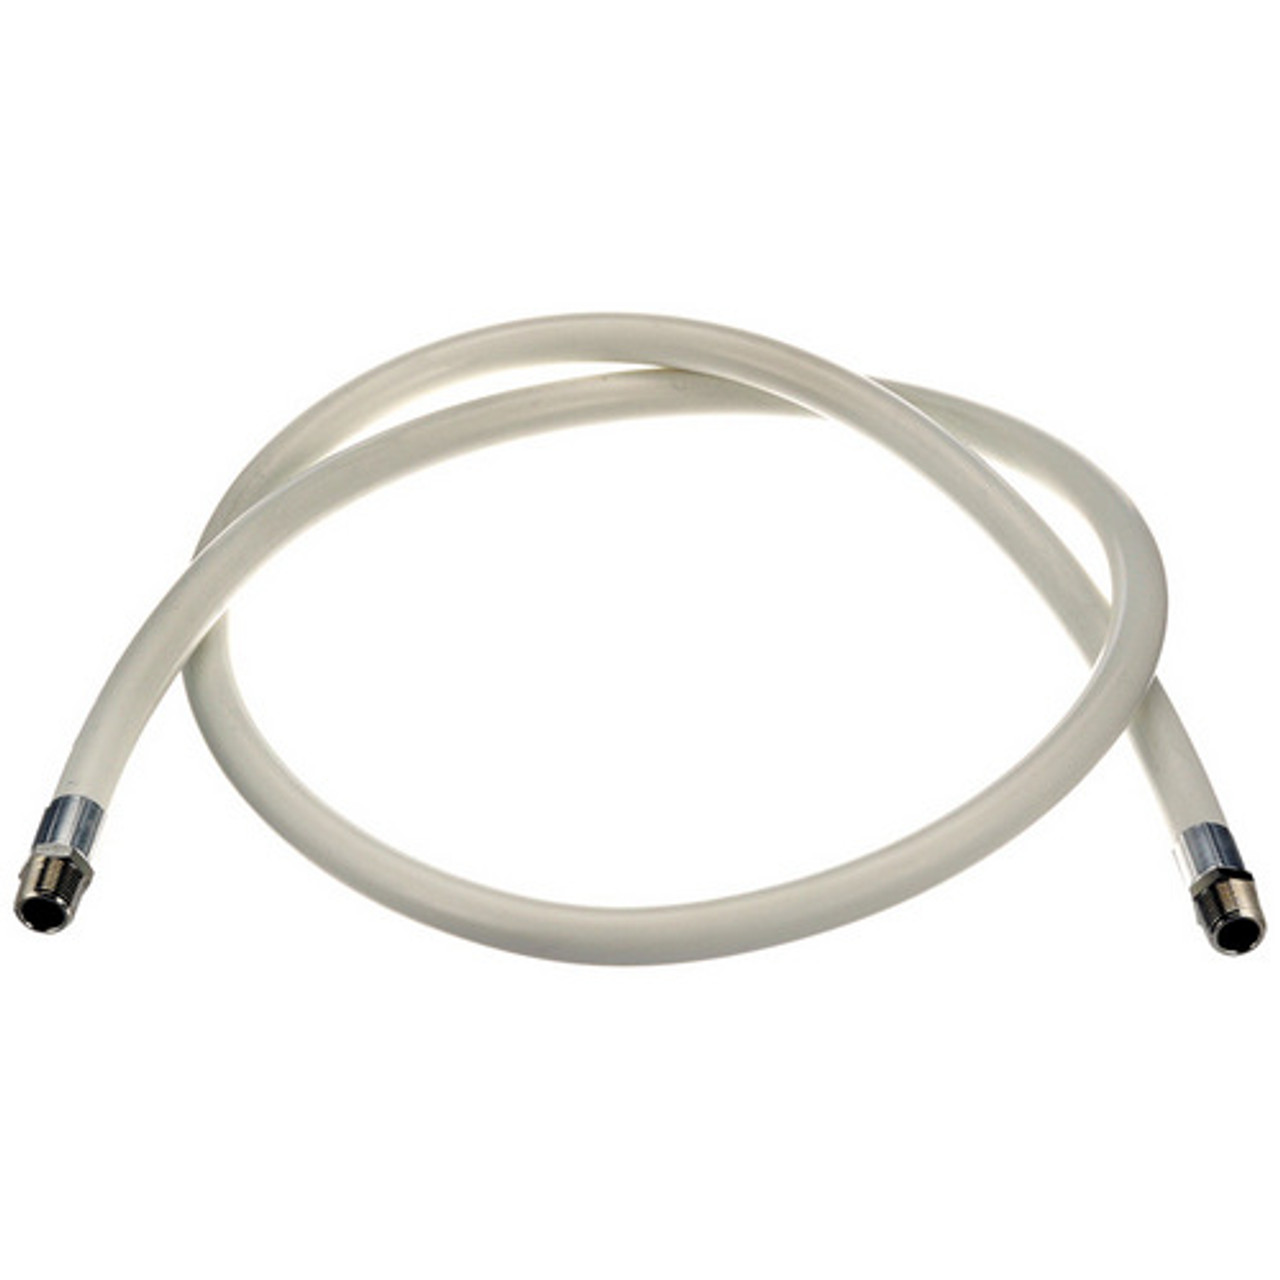 Filter Hose - Replacement Part For Frymaster 8120414